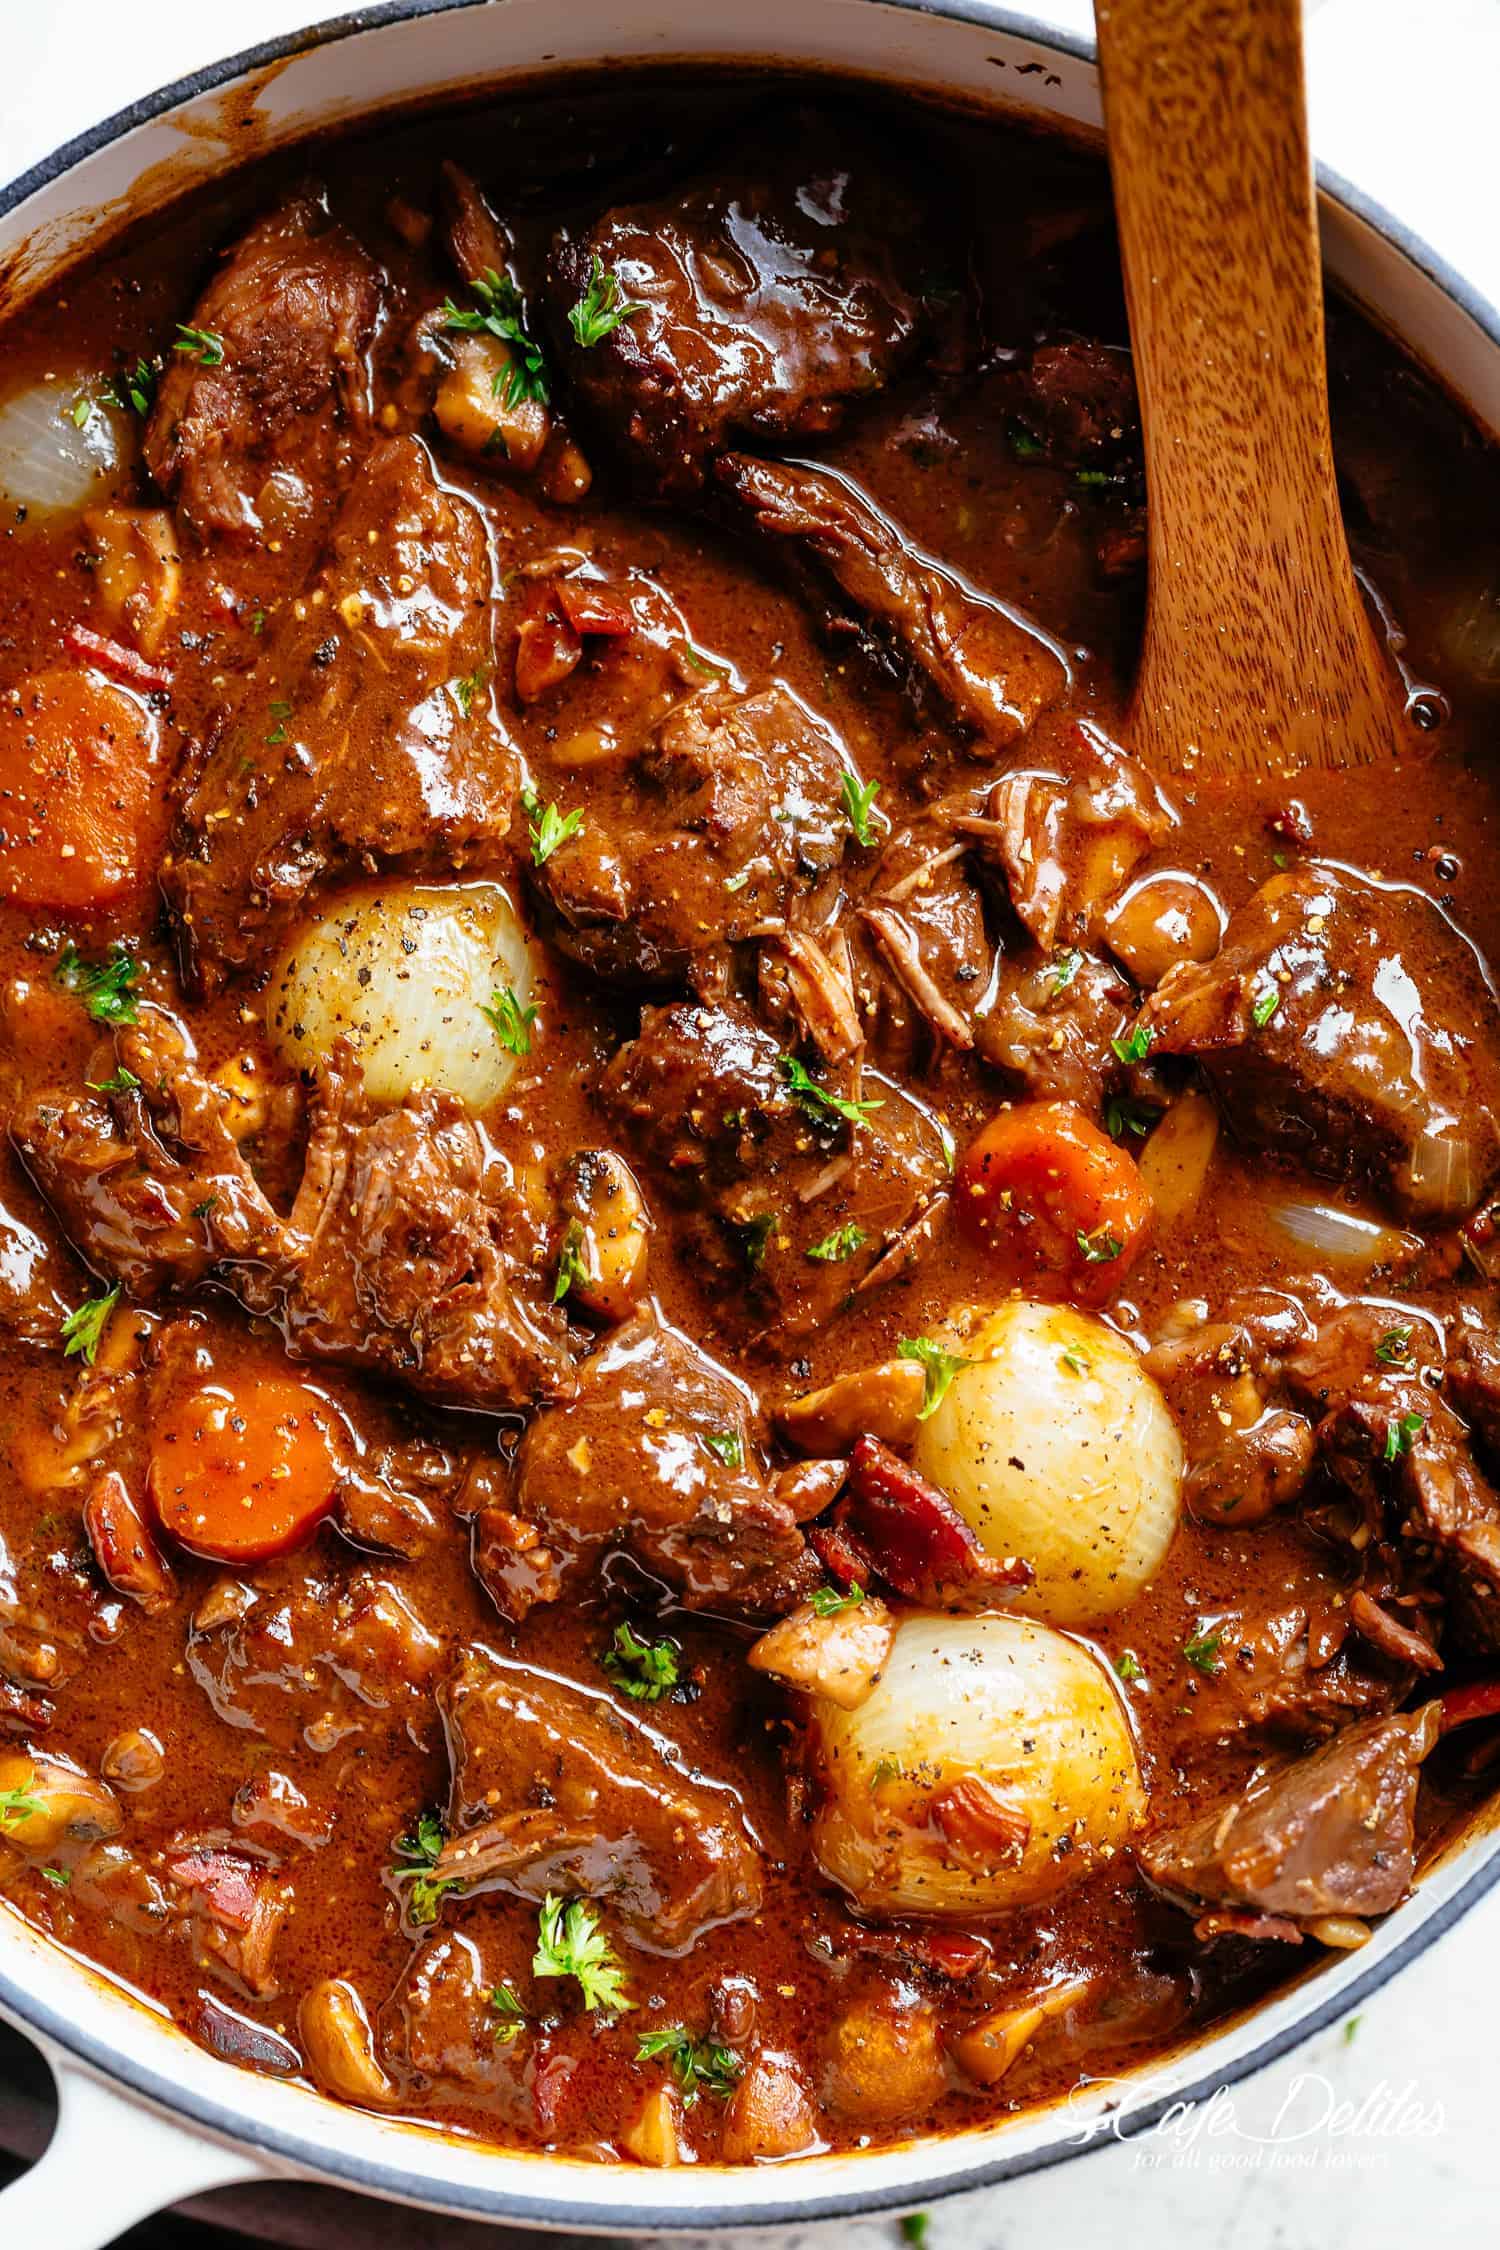 Disney Beef Stew Recipe: Mouthwatering, Flavorful, and Magical!